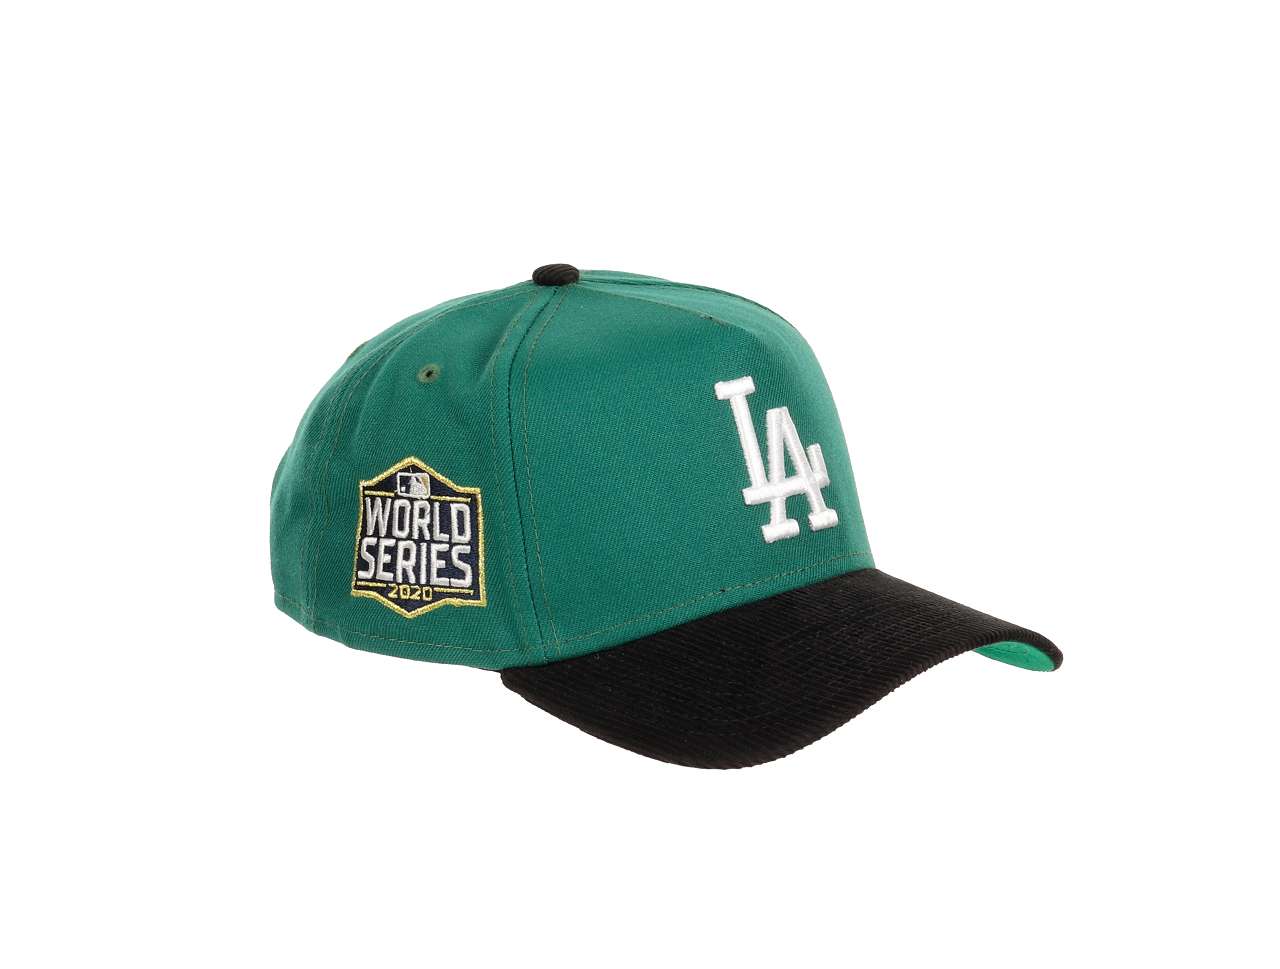 Los Angeles Dodgers MLB World Series 2020 Sidepatch Green Black Cord 9Forty A-Frame Snapback Cap New Era